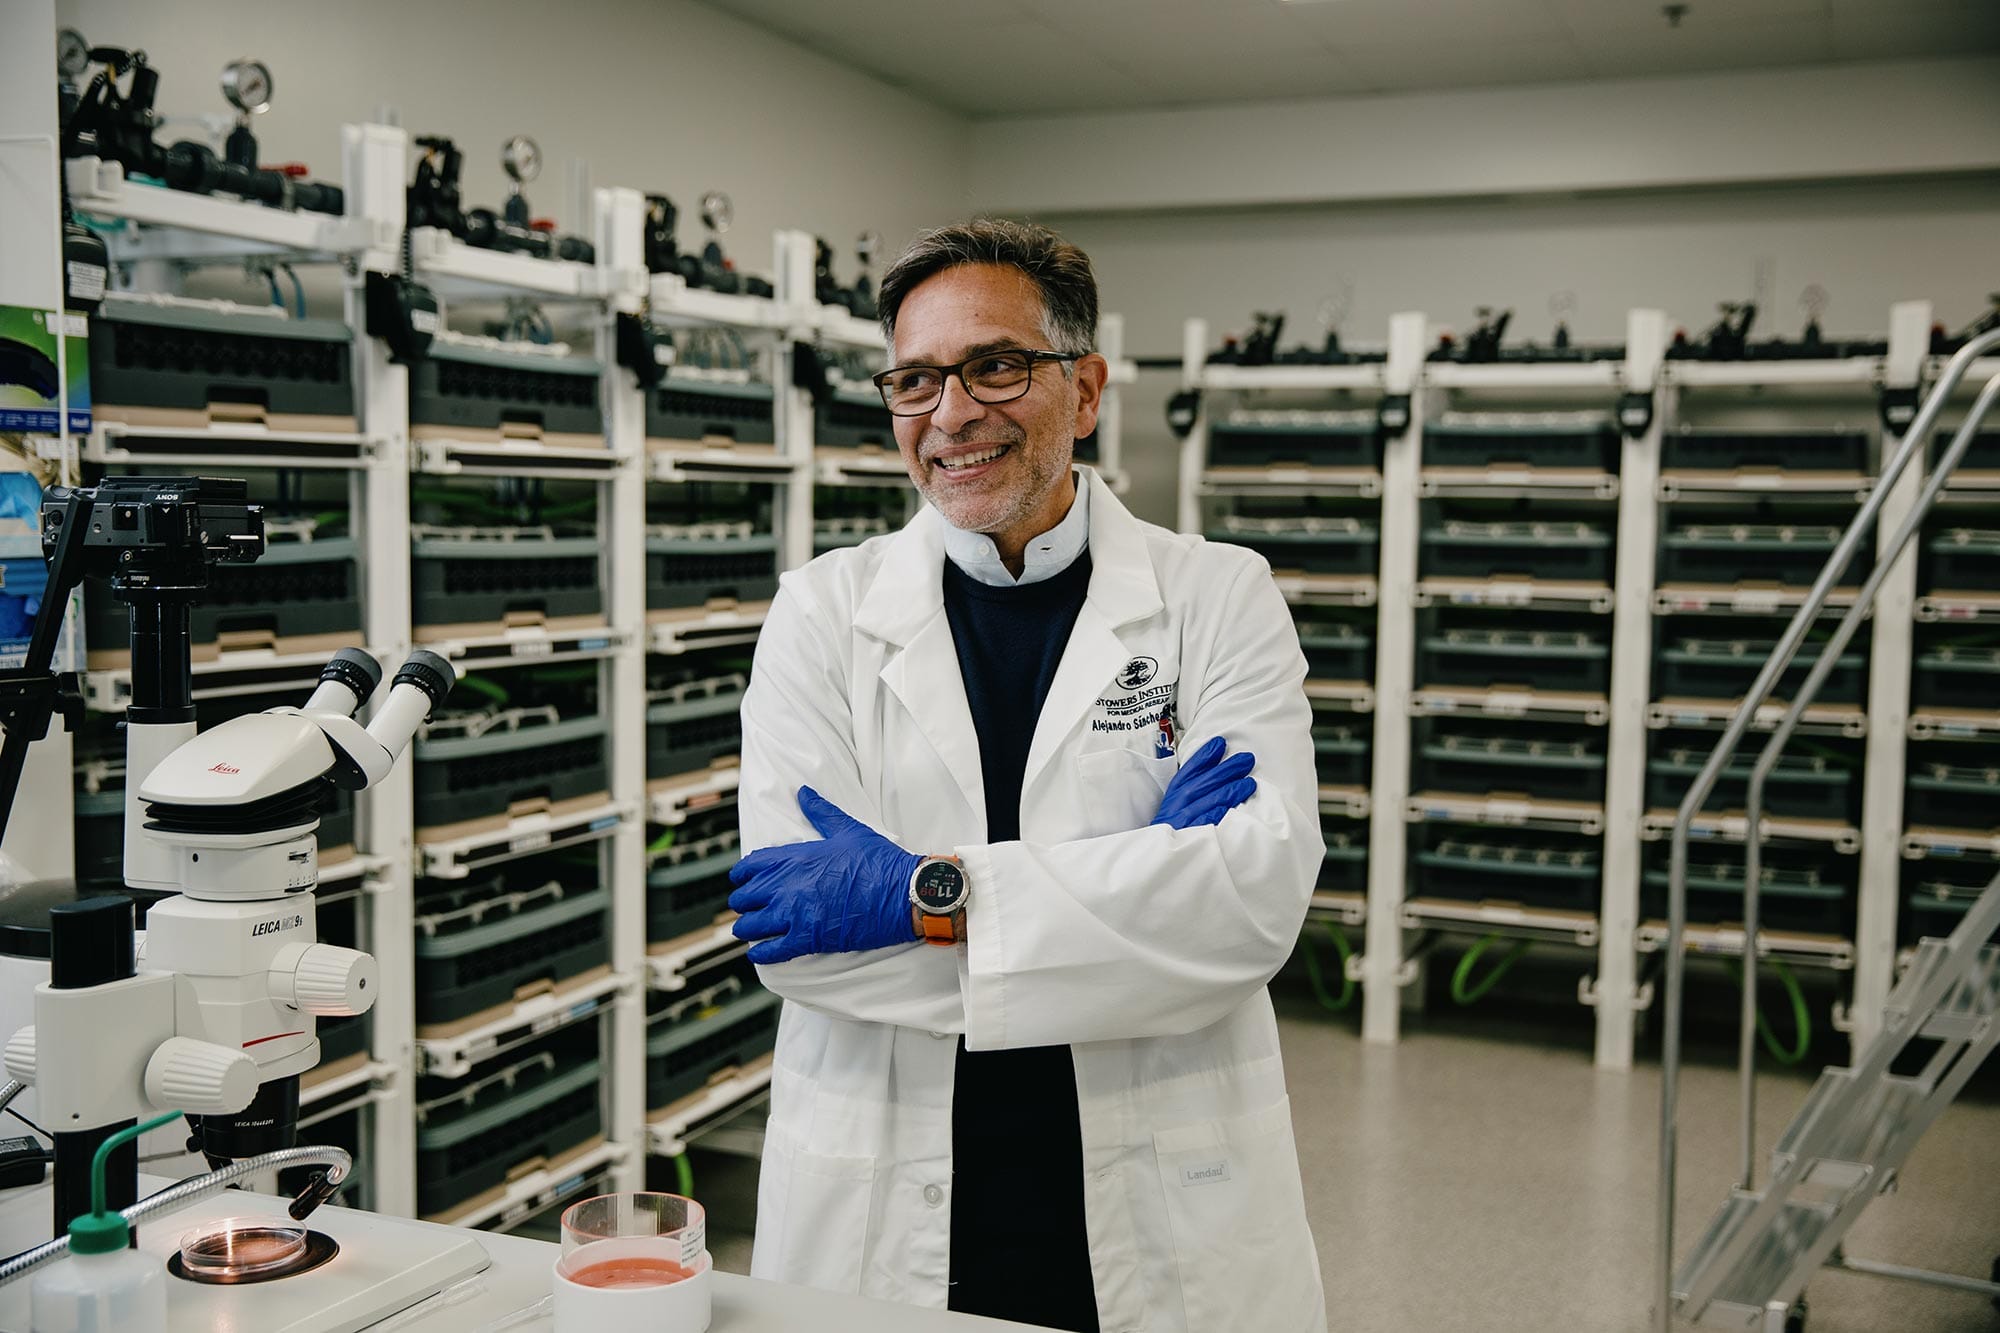 Alejandro Sánchez Alvarado wearing a white lab coat, standing in the microscope room at his lab.